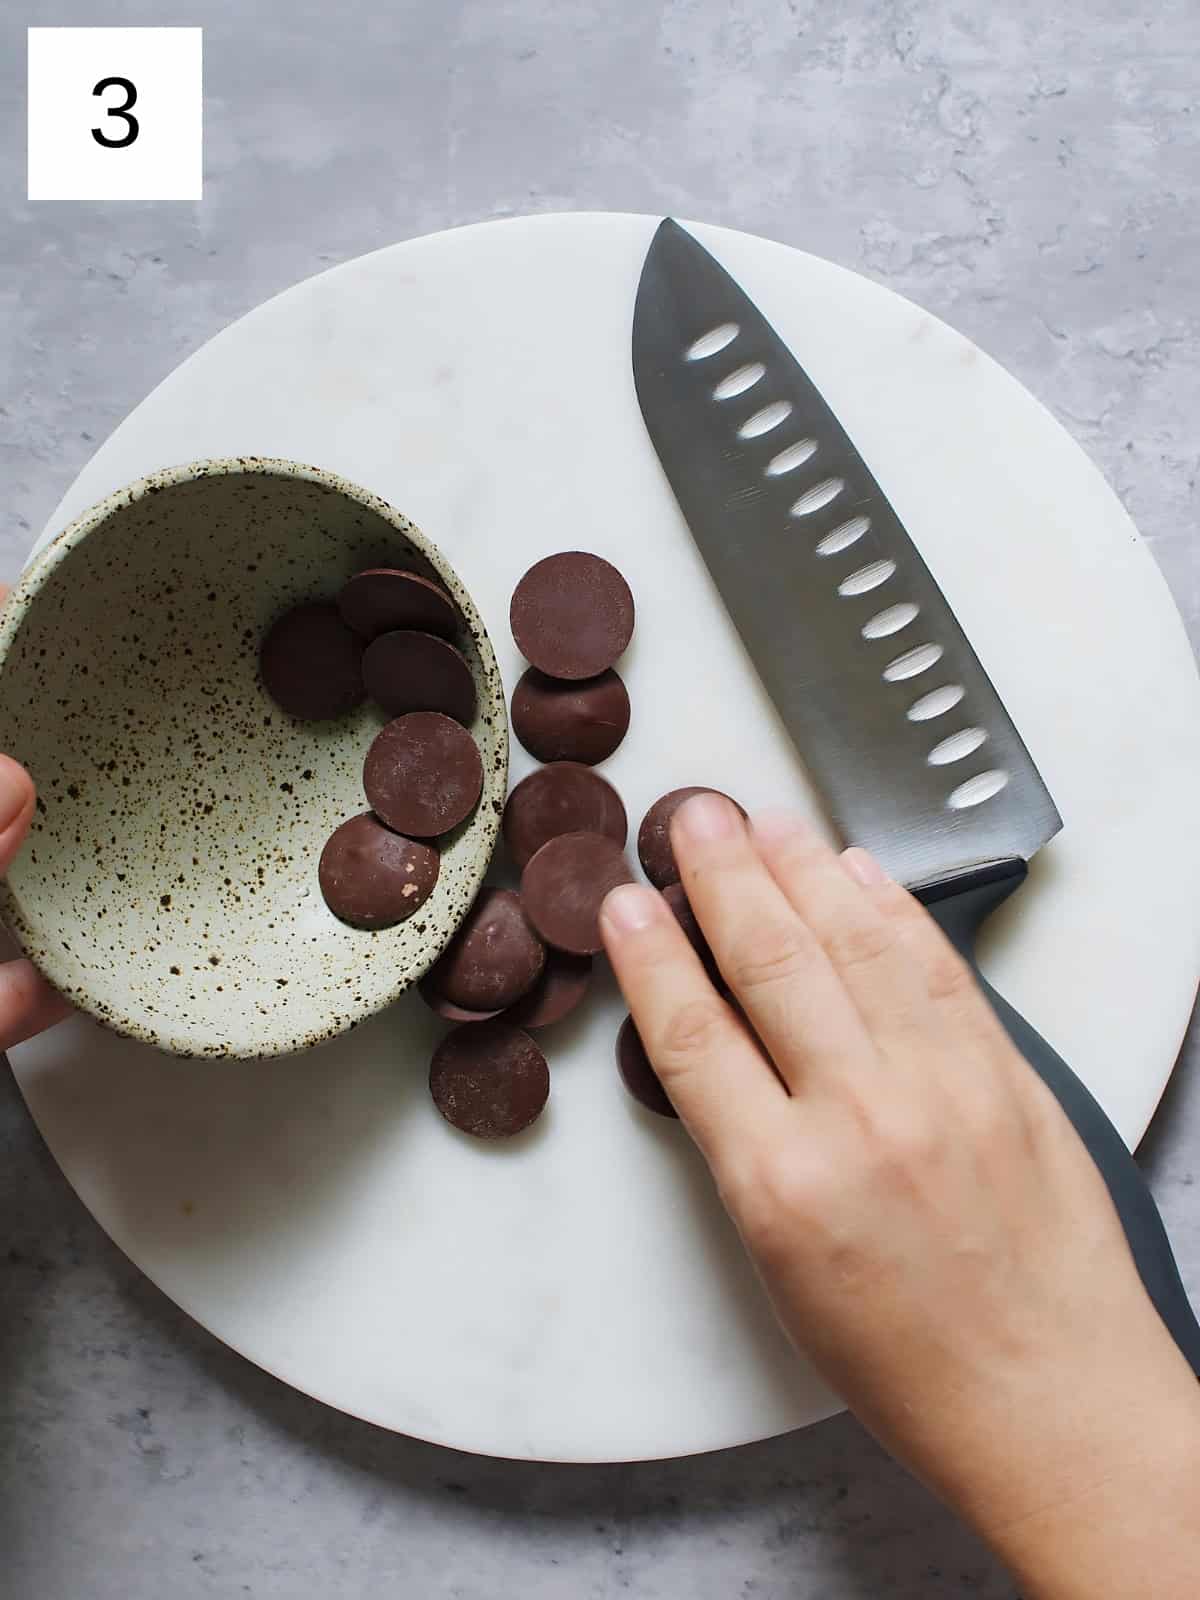 A person transferring chocolate to a plate, next to a knife.